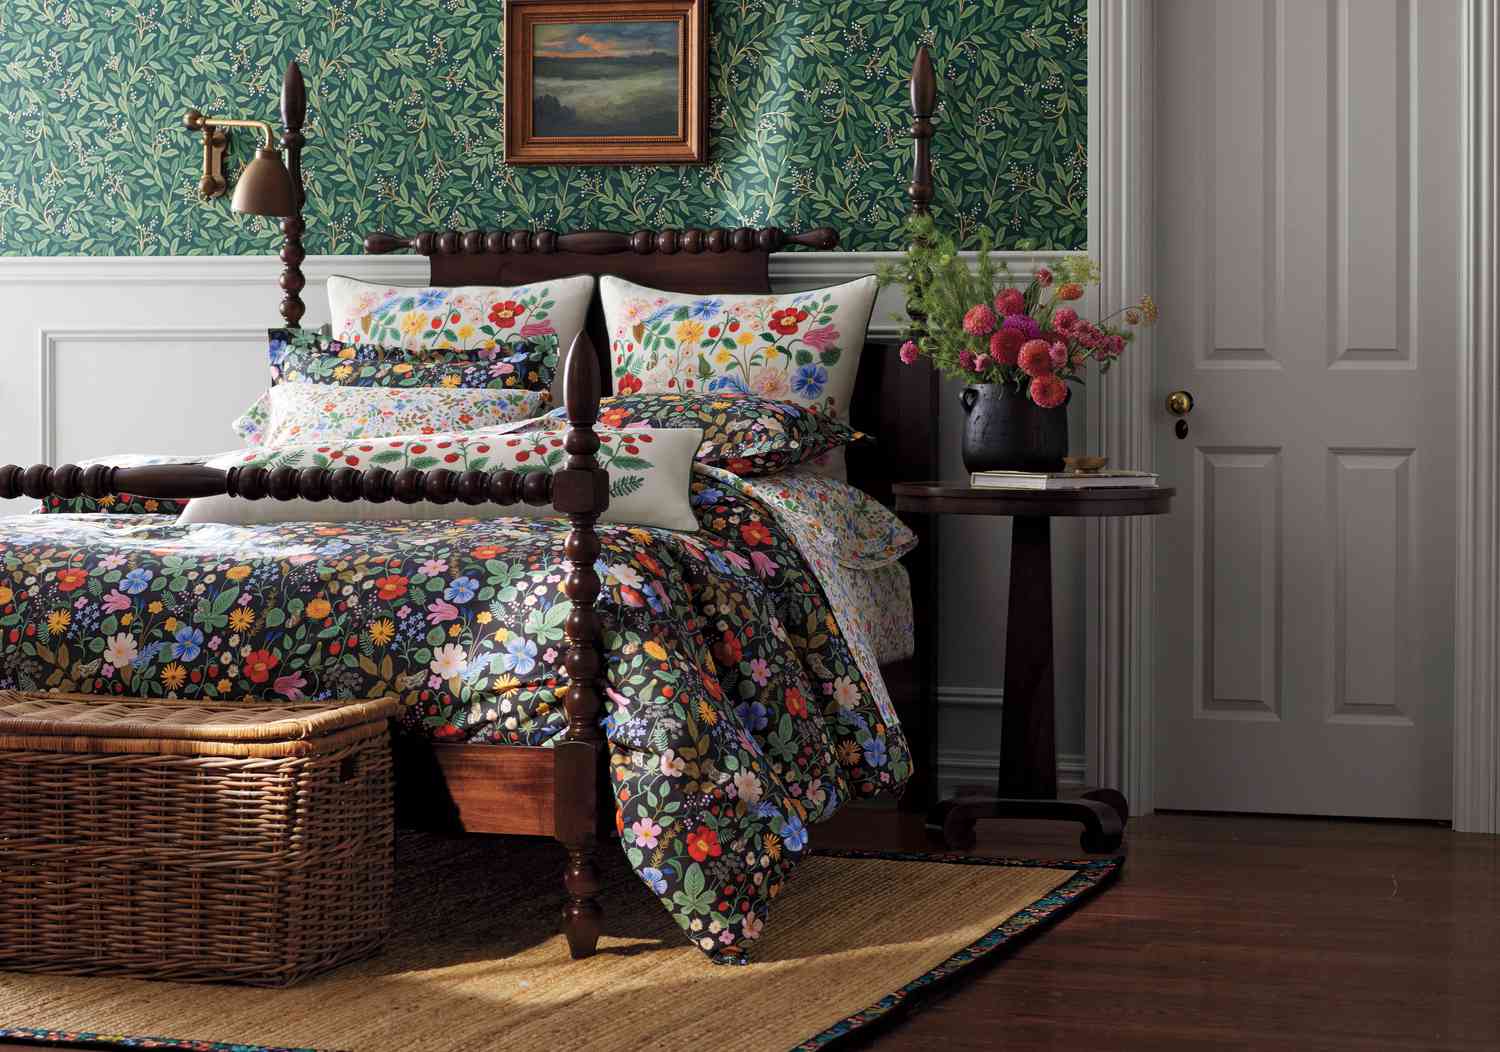 Rifle Paper Co. x The Company Store bedding collection